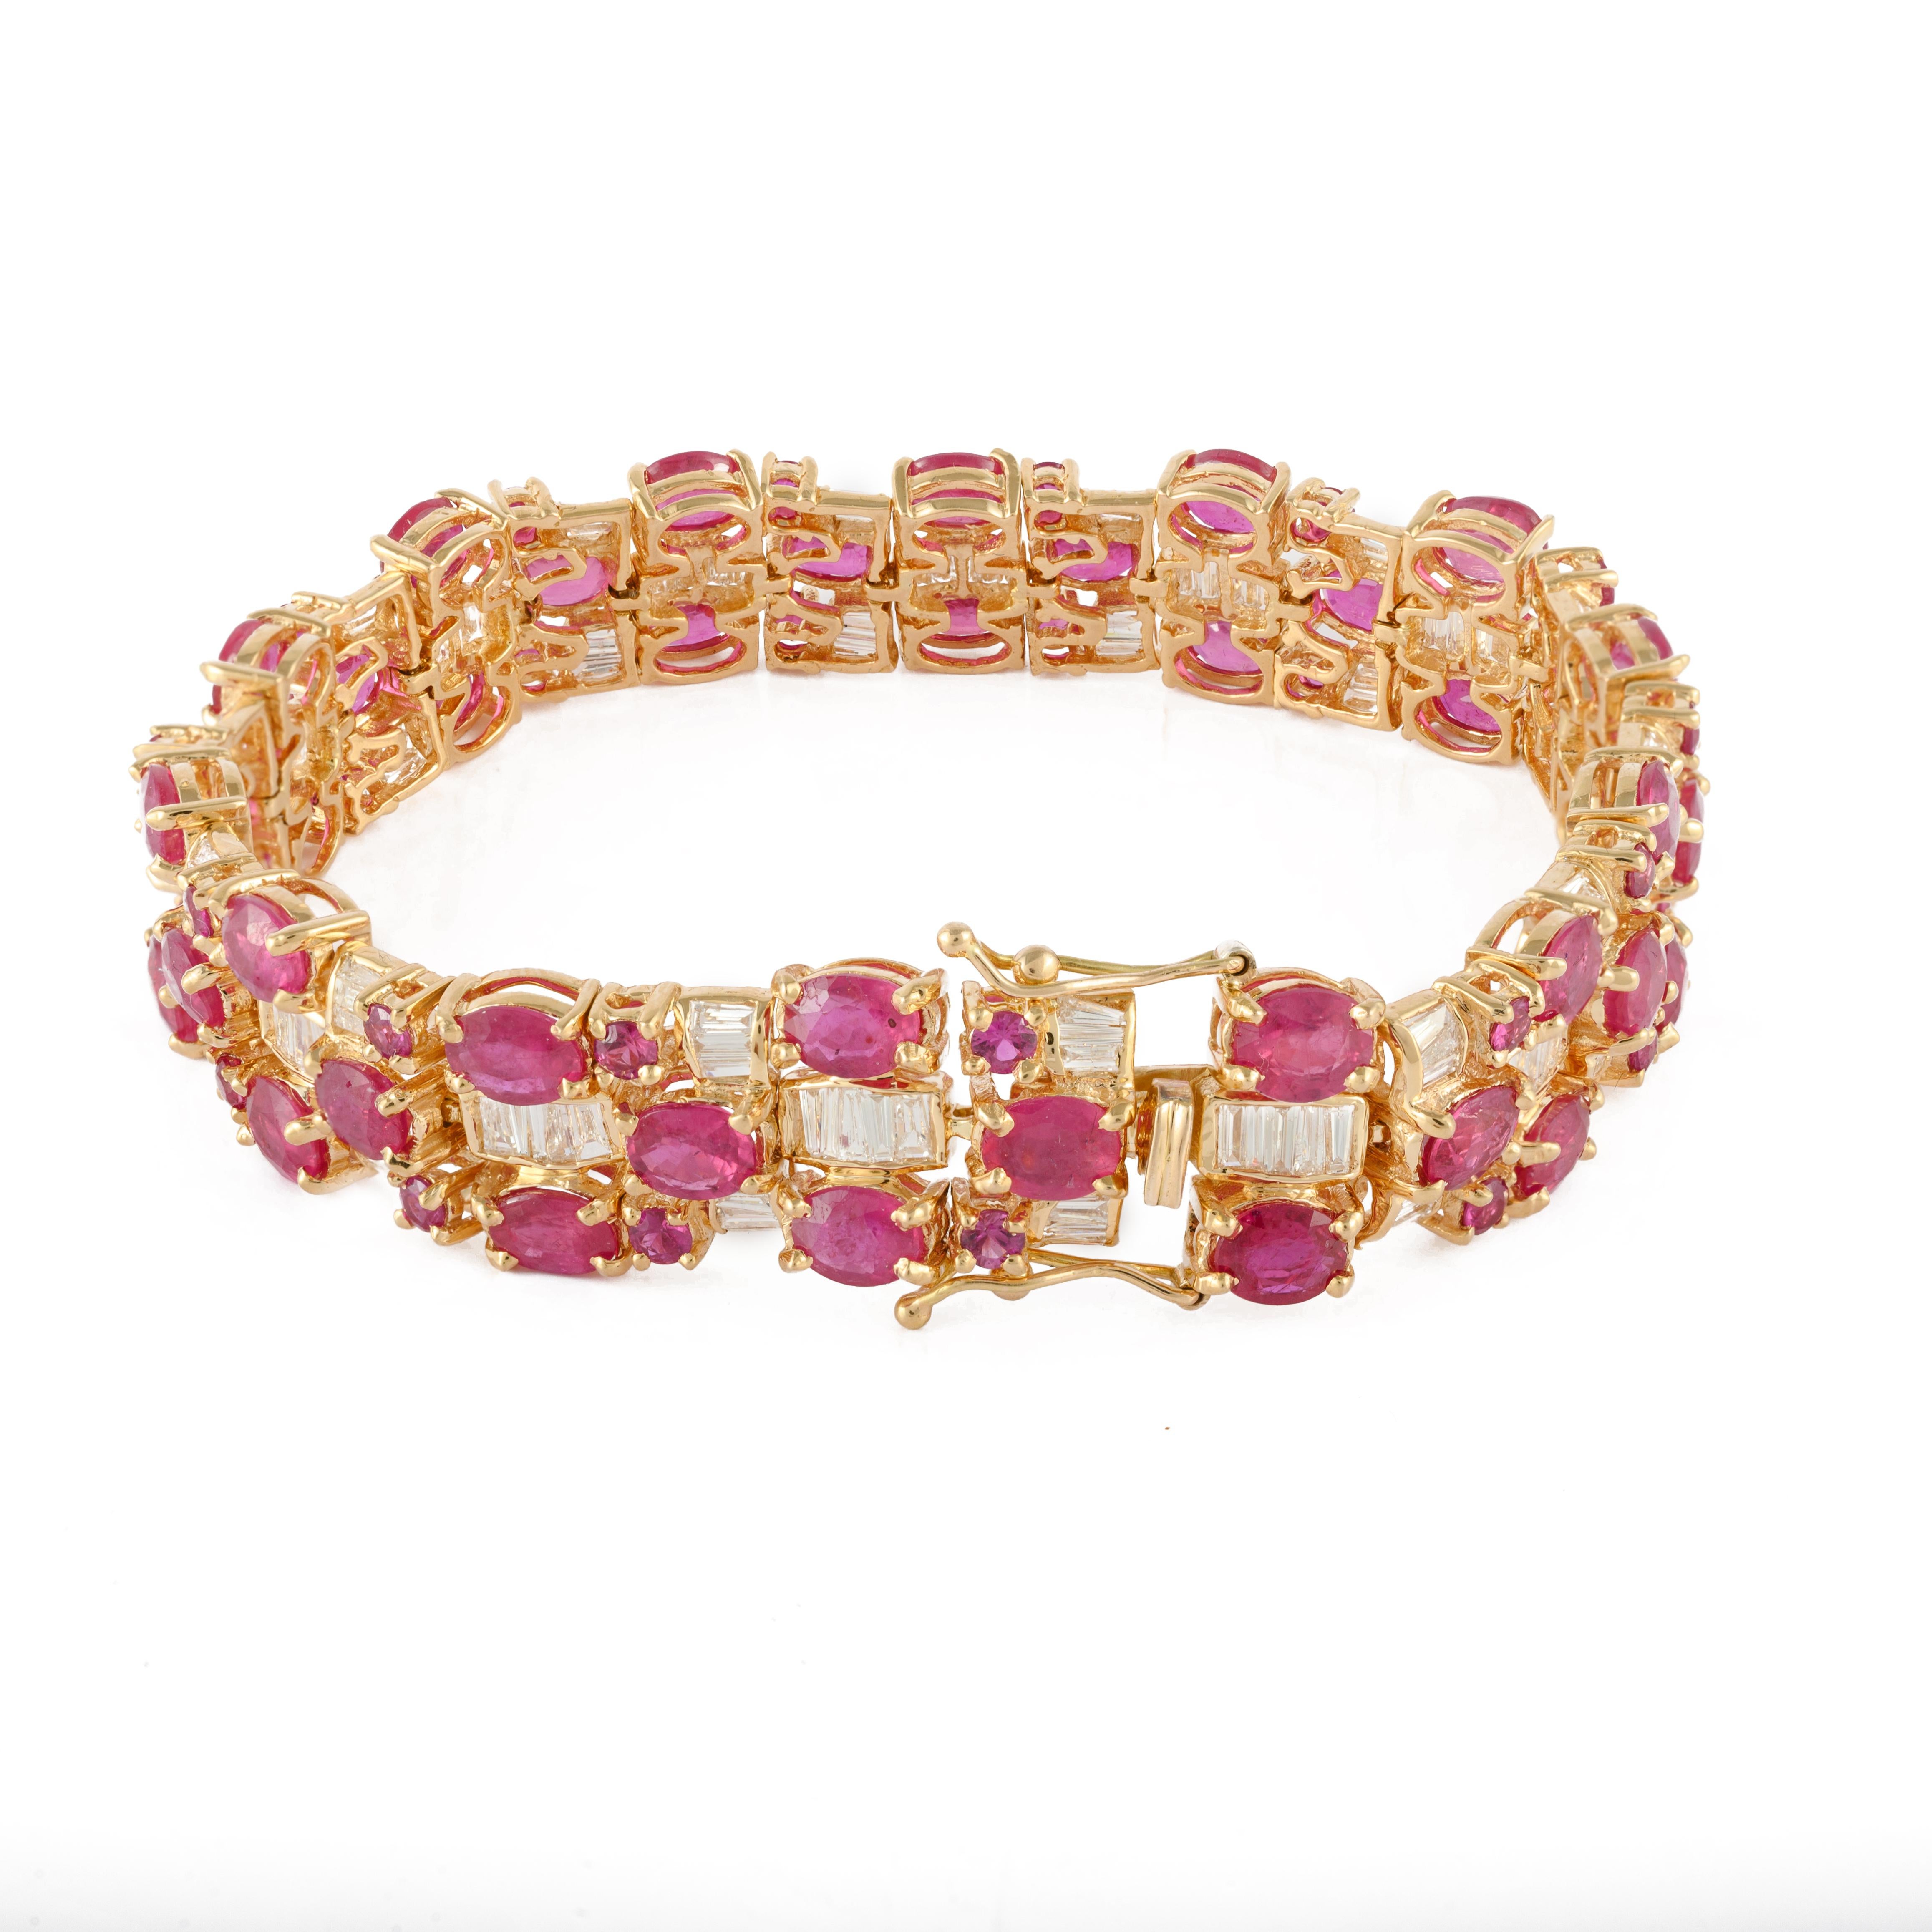 29.88 Carat Natural Ruby Art Deco Diamond Bracelet in 18k Solid Yellow Gold For Sale 2